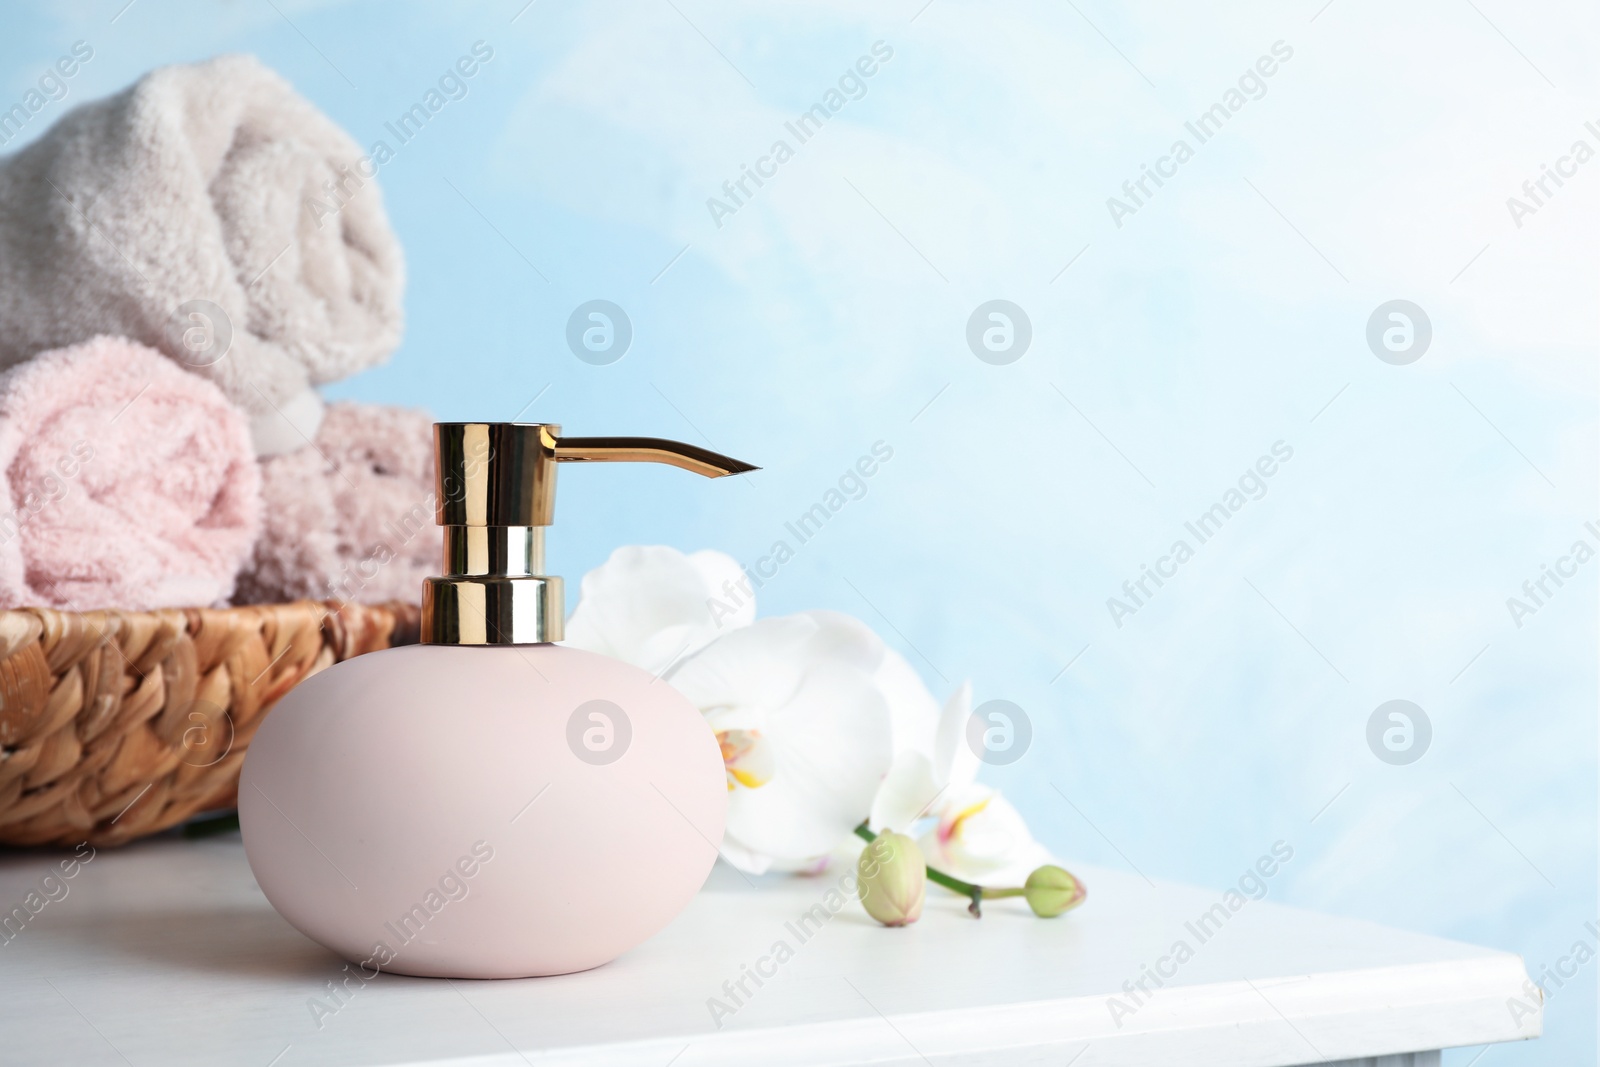 Photo of Stylish soap dispenser, towels in wicker basket and flowers on table. Space for text